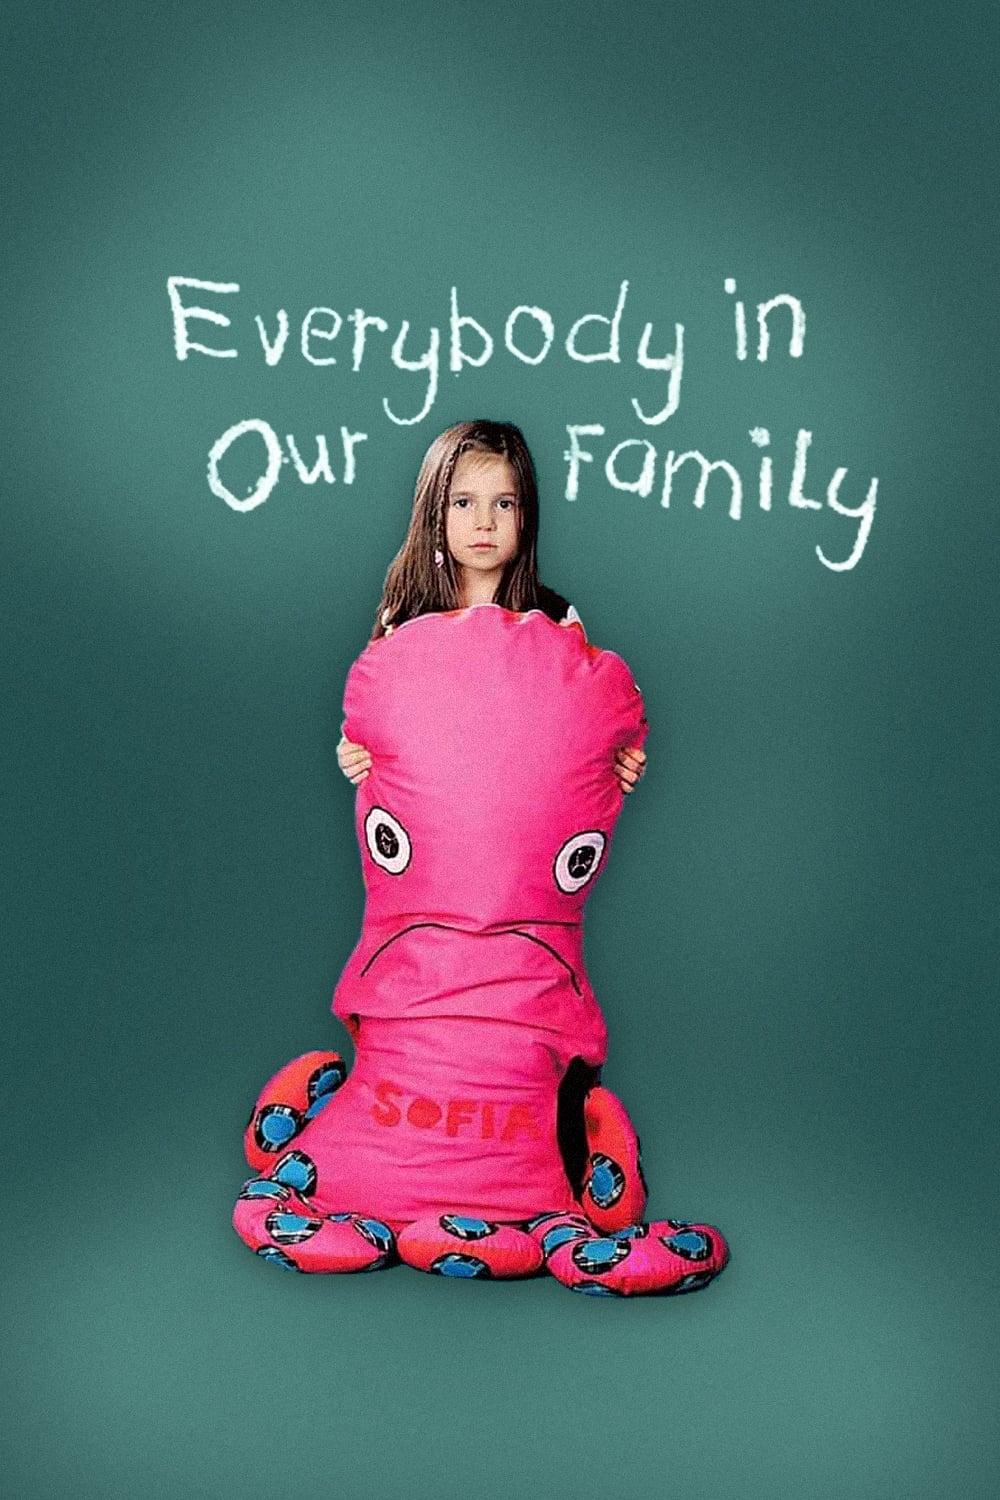 Everybody in Our Family poster